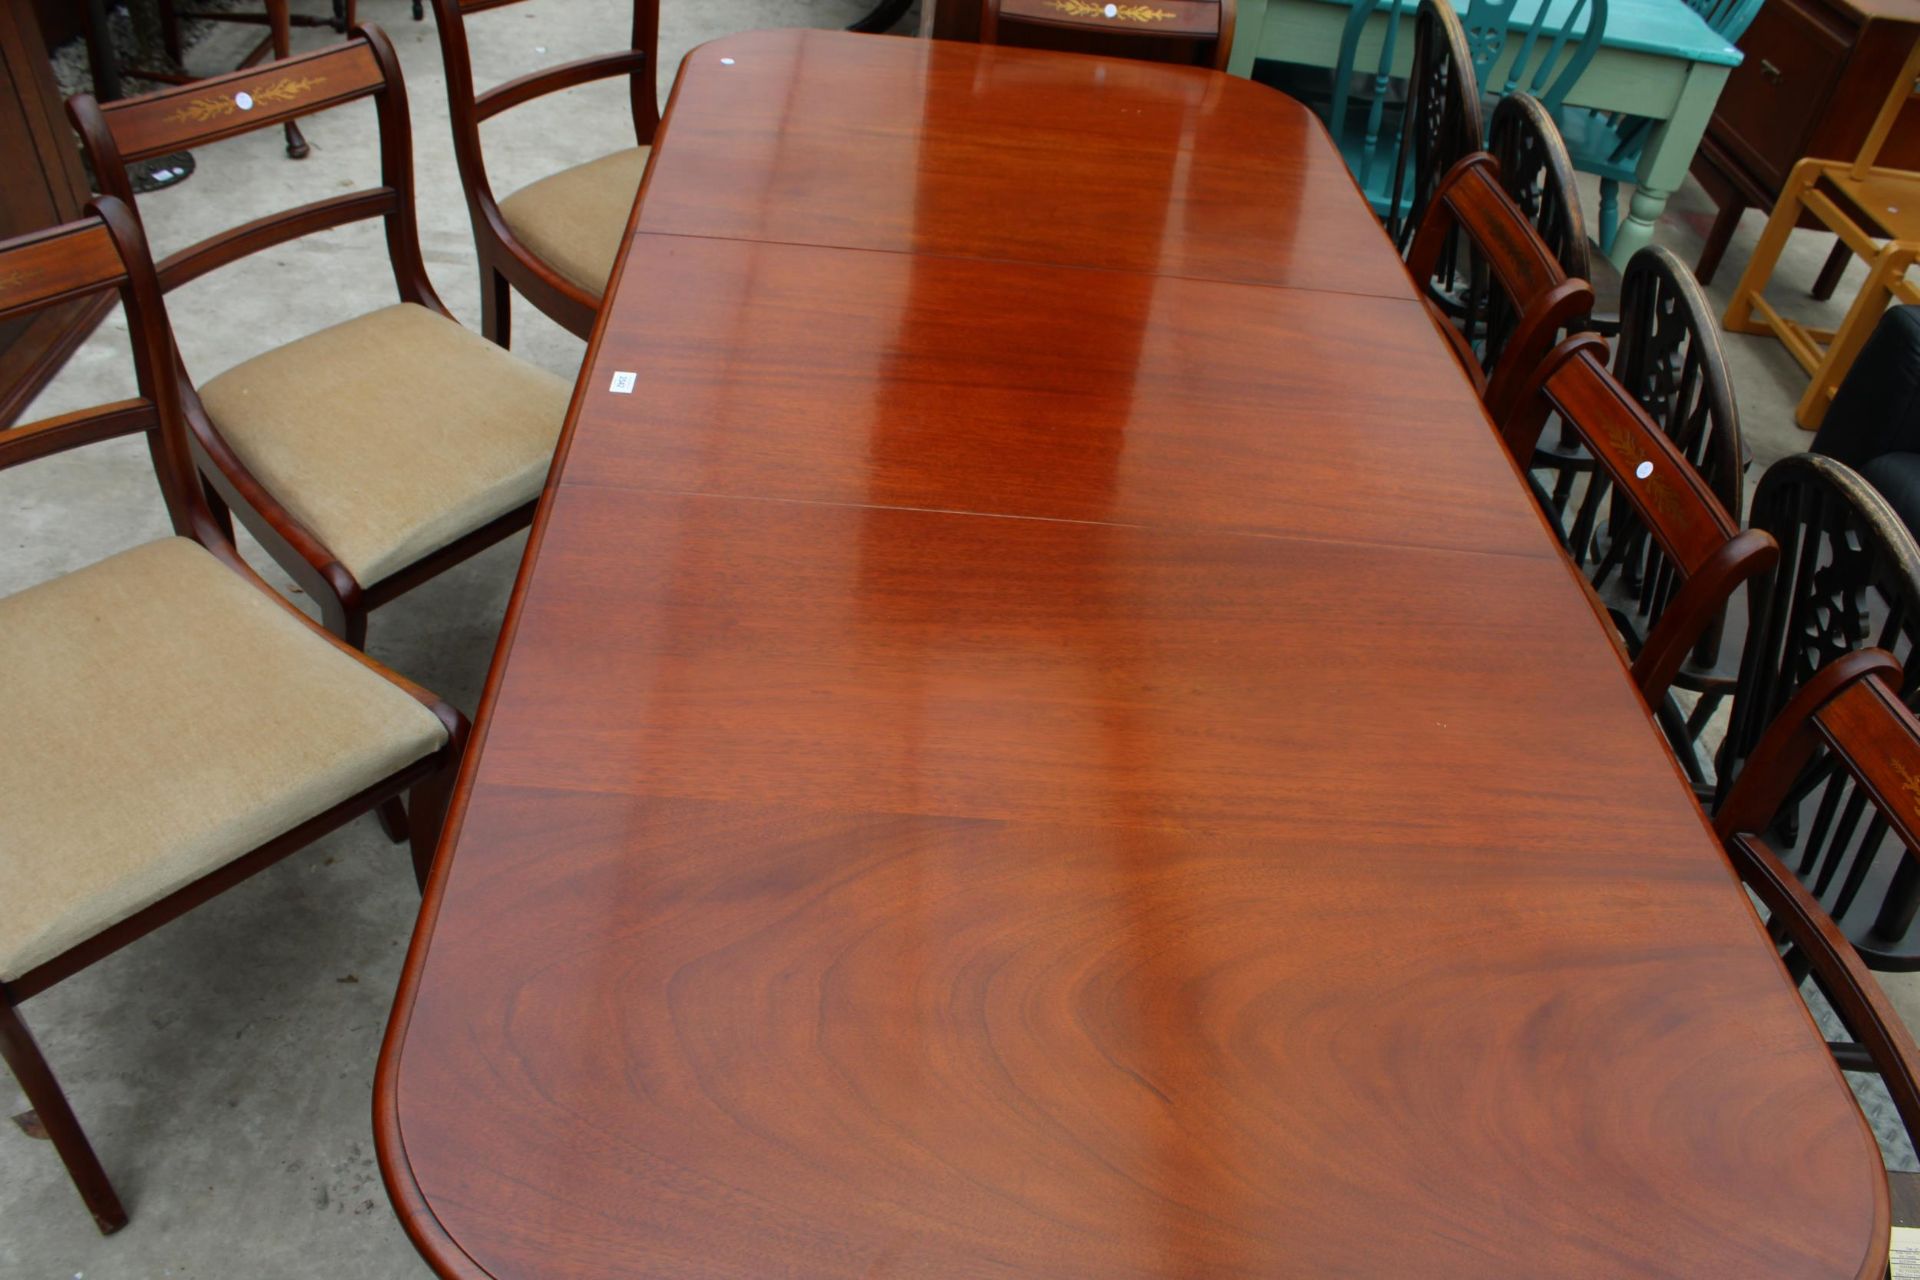 A MAHOGANY REGENCY STYLE EXTENDING TWIN PEDESTAL DINING TABLE 62" X 38" (LEAF 21") AND SIX BRASS - Image 4 of 6